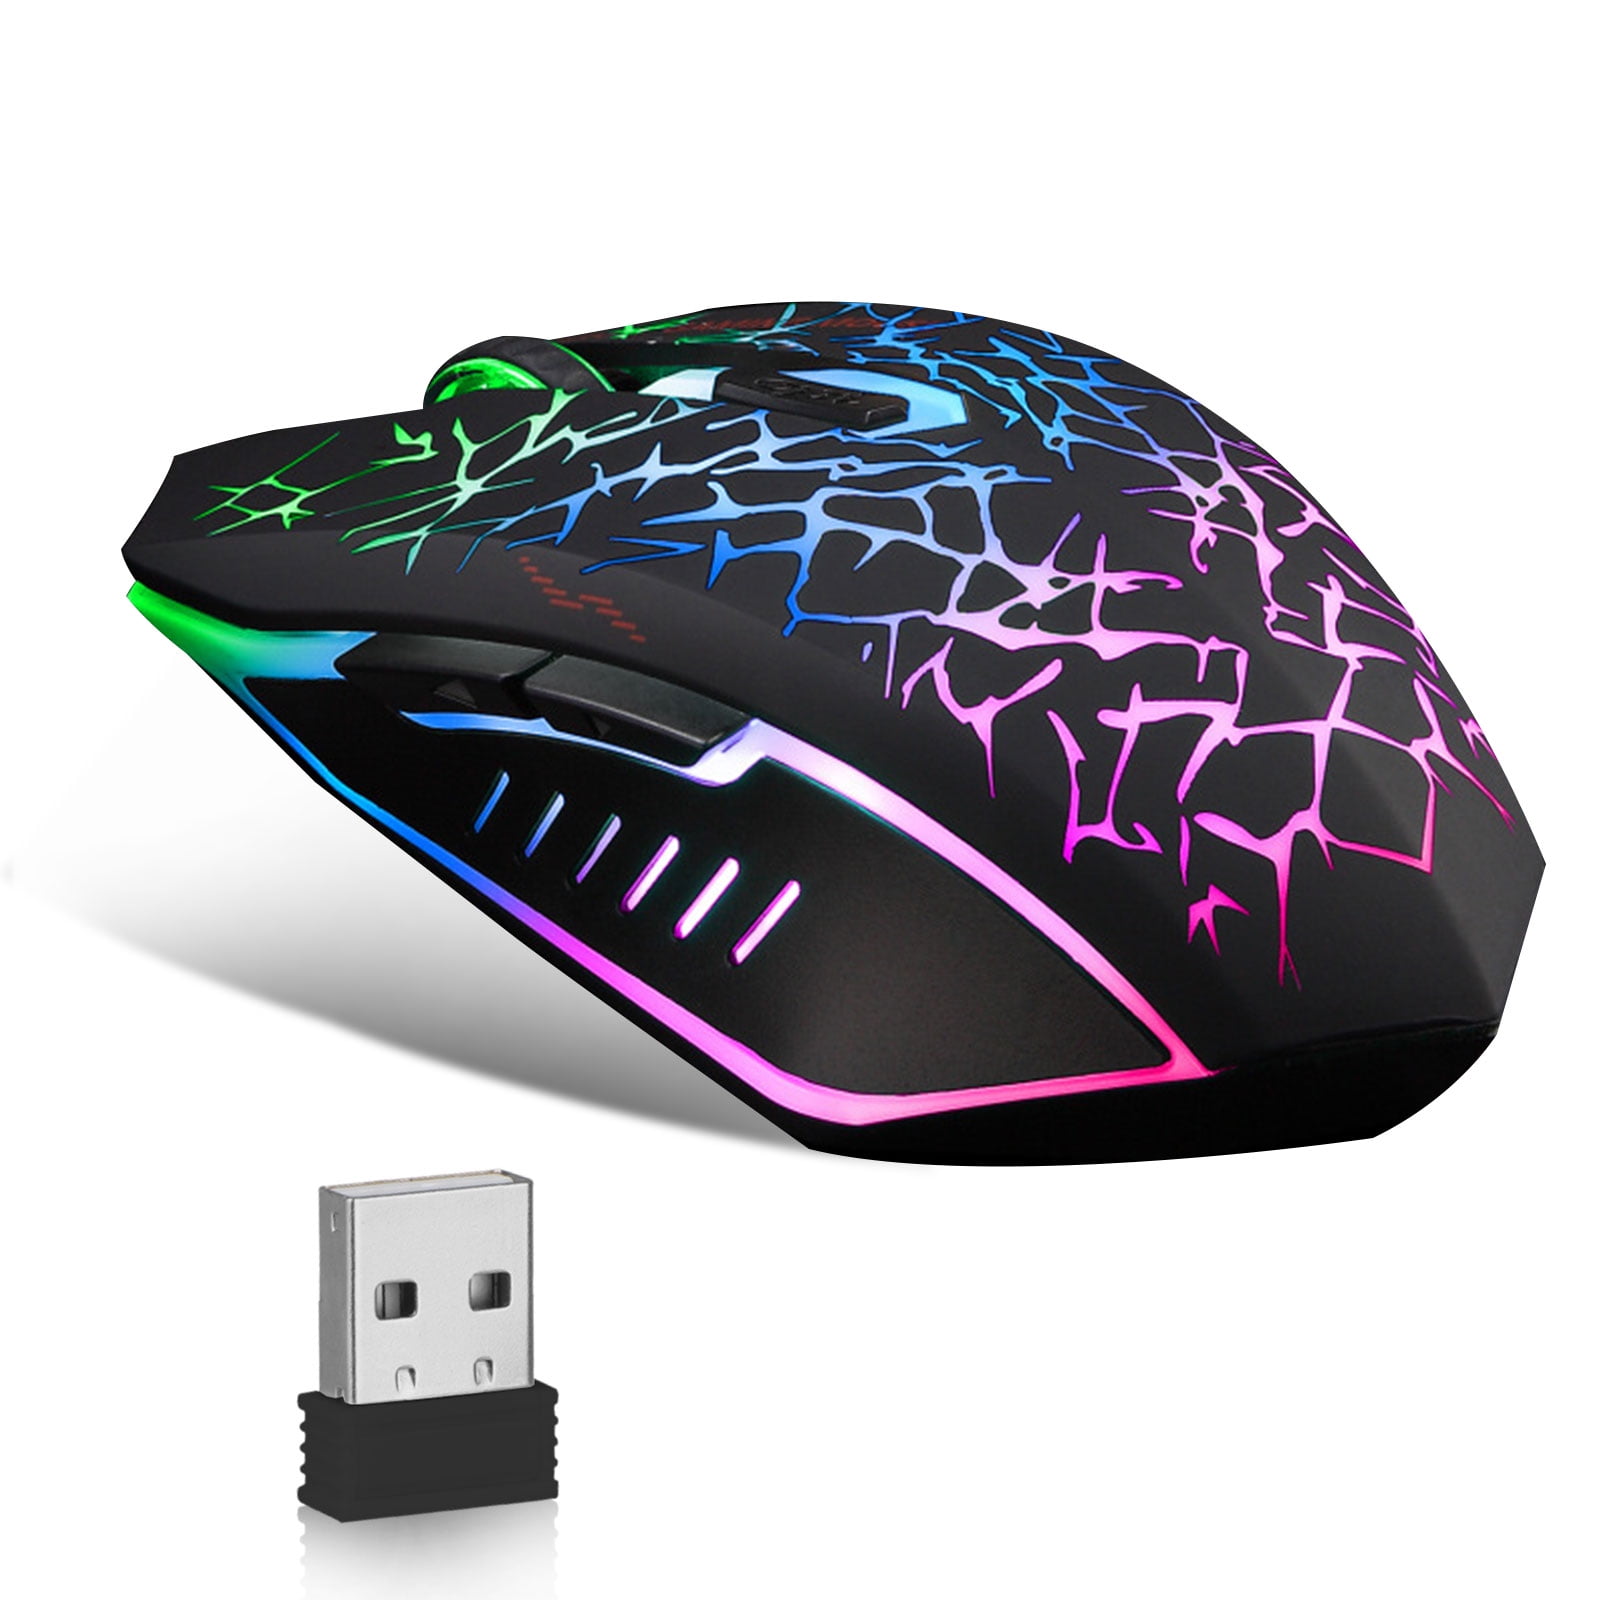 2.4GHz Wireless Mouse Silent Transparent LED Optical Luminous Gaming Mice For PC 